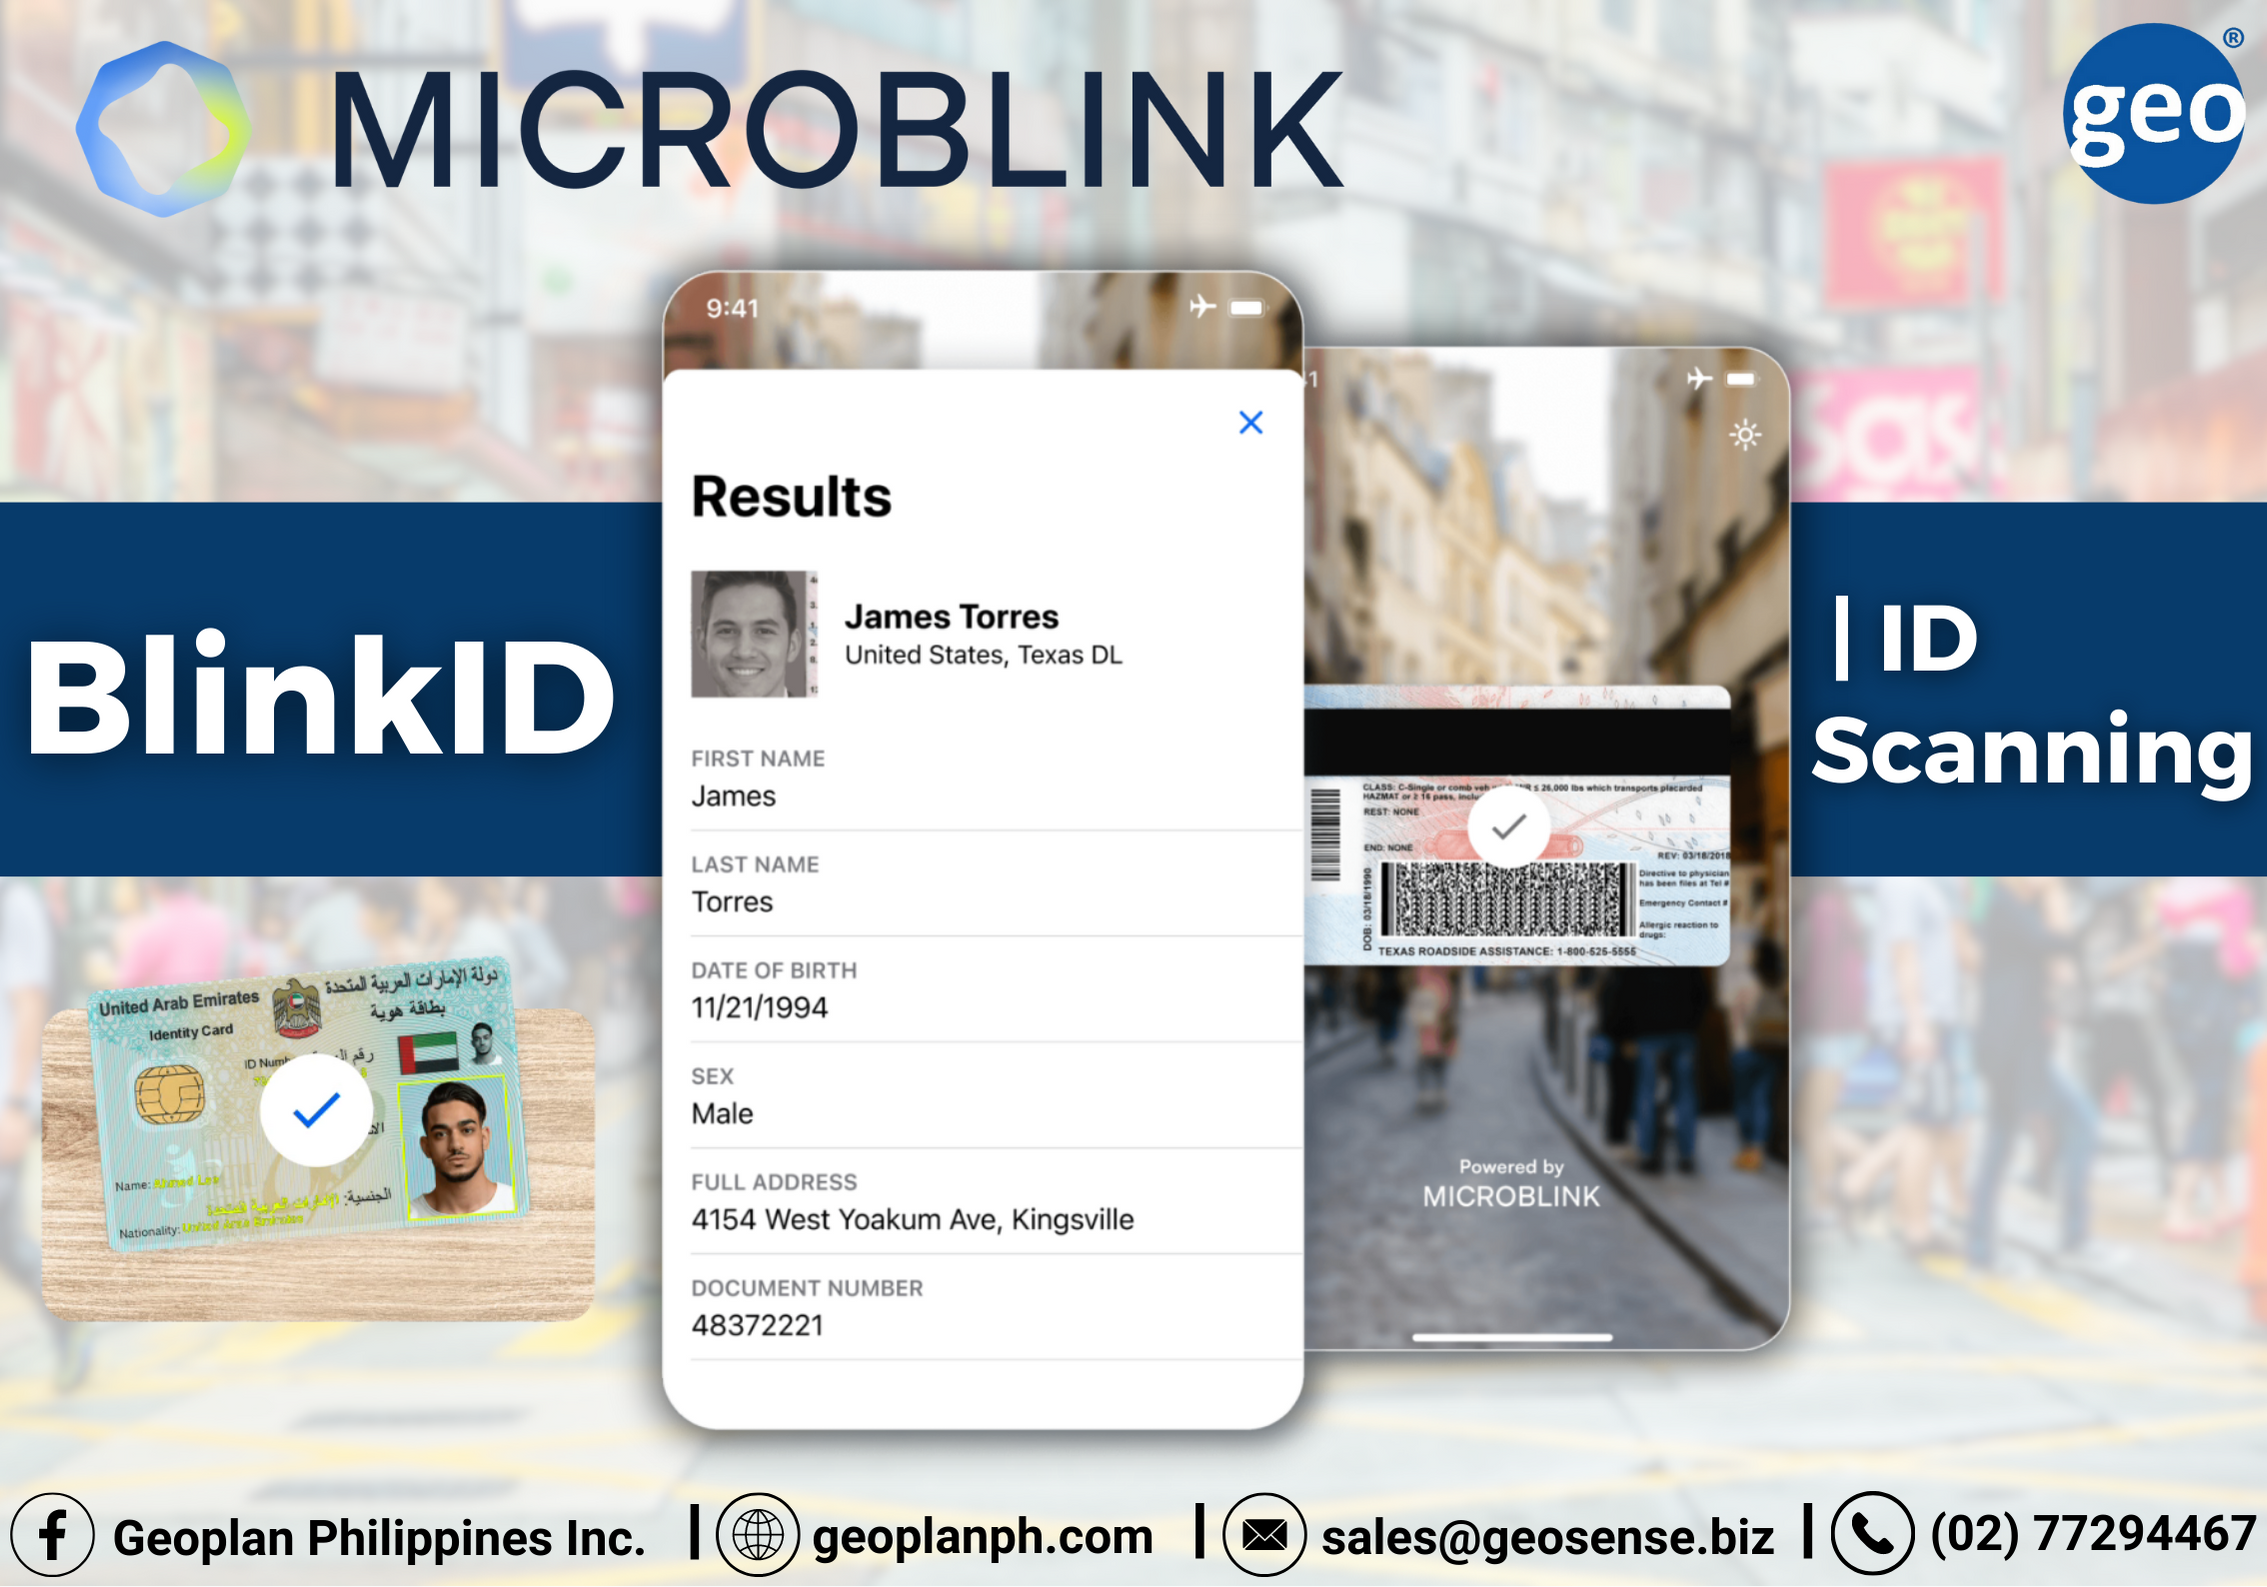 Microblink: Empower Trust and Security Experience with Advanced ID Scanning Solution.